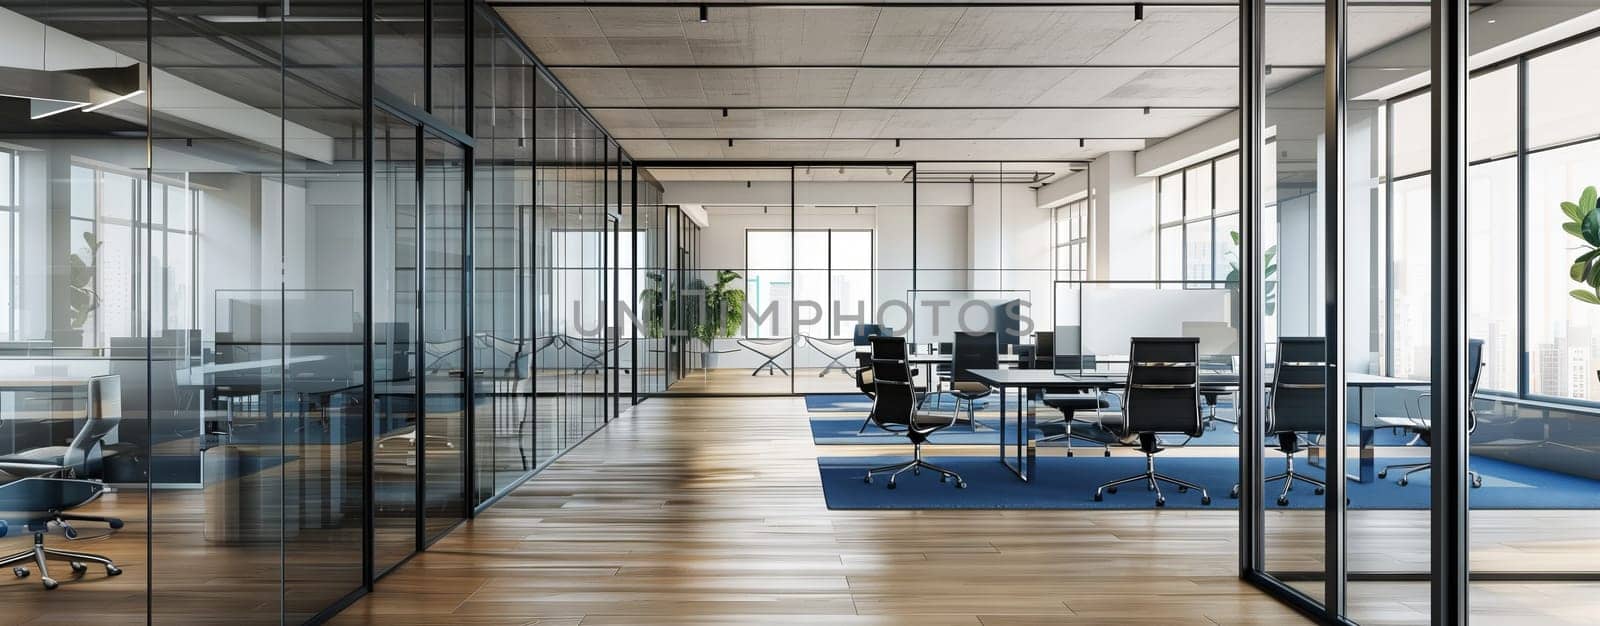 The building features an empty office with numerous windows and glass walls, showcasing a modern design with hardwood flooring and wood fixtures. Lush plants add a touch of greenery to the space